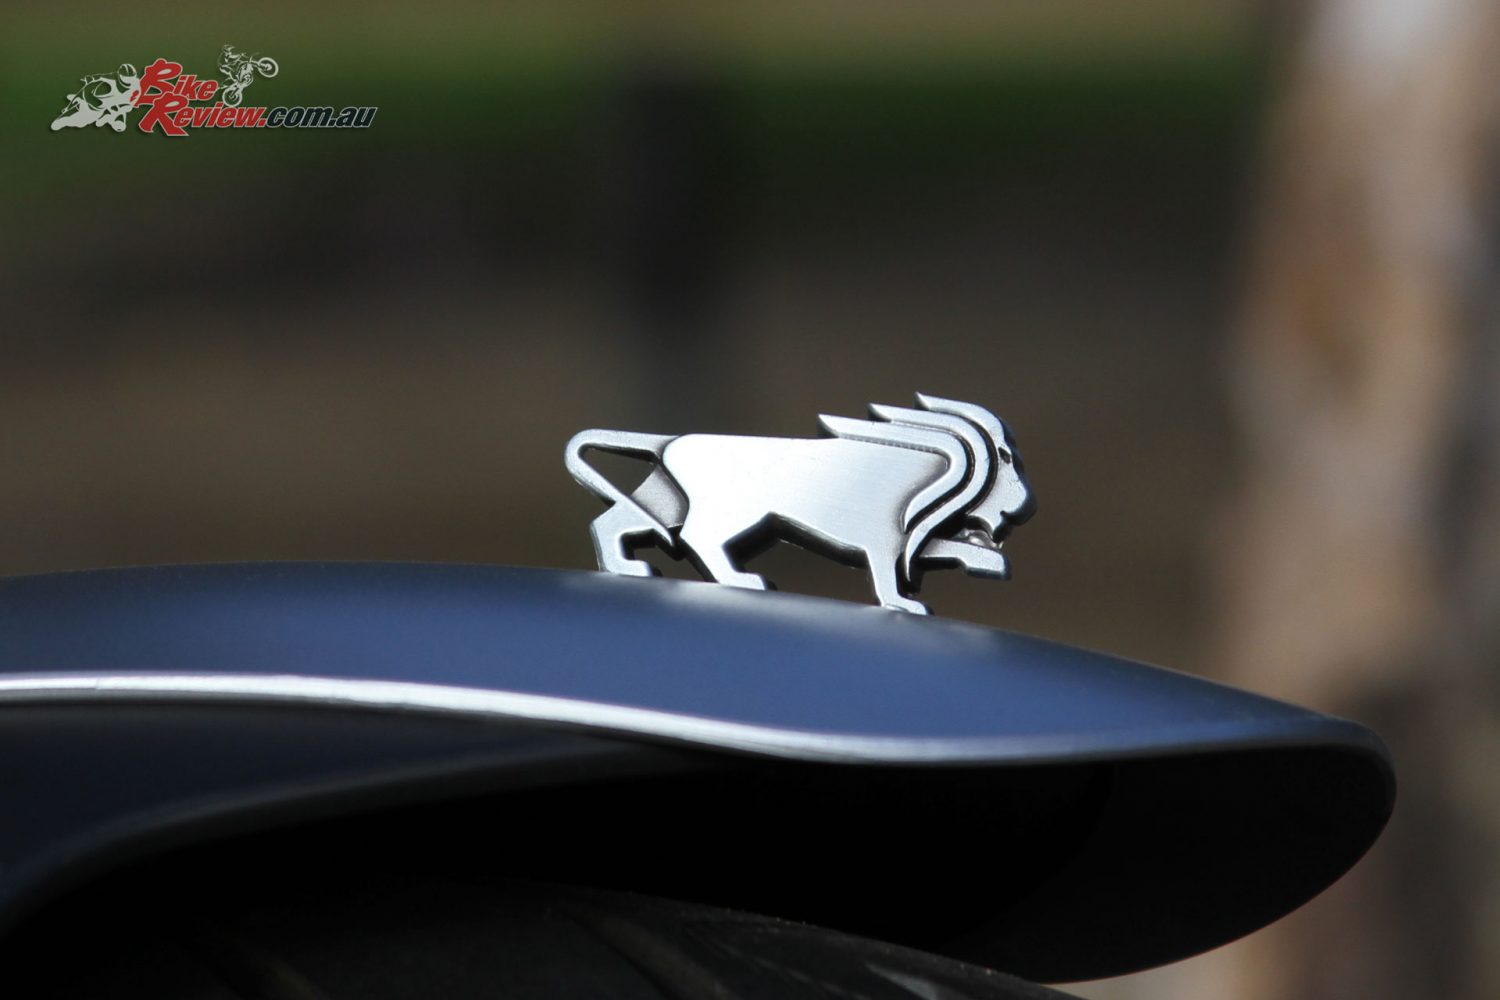 Benelli have put great effort into their badging and it really shows